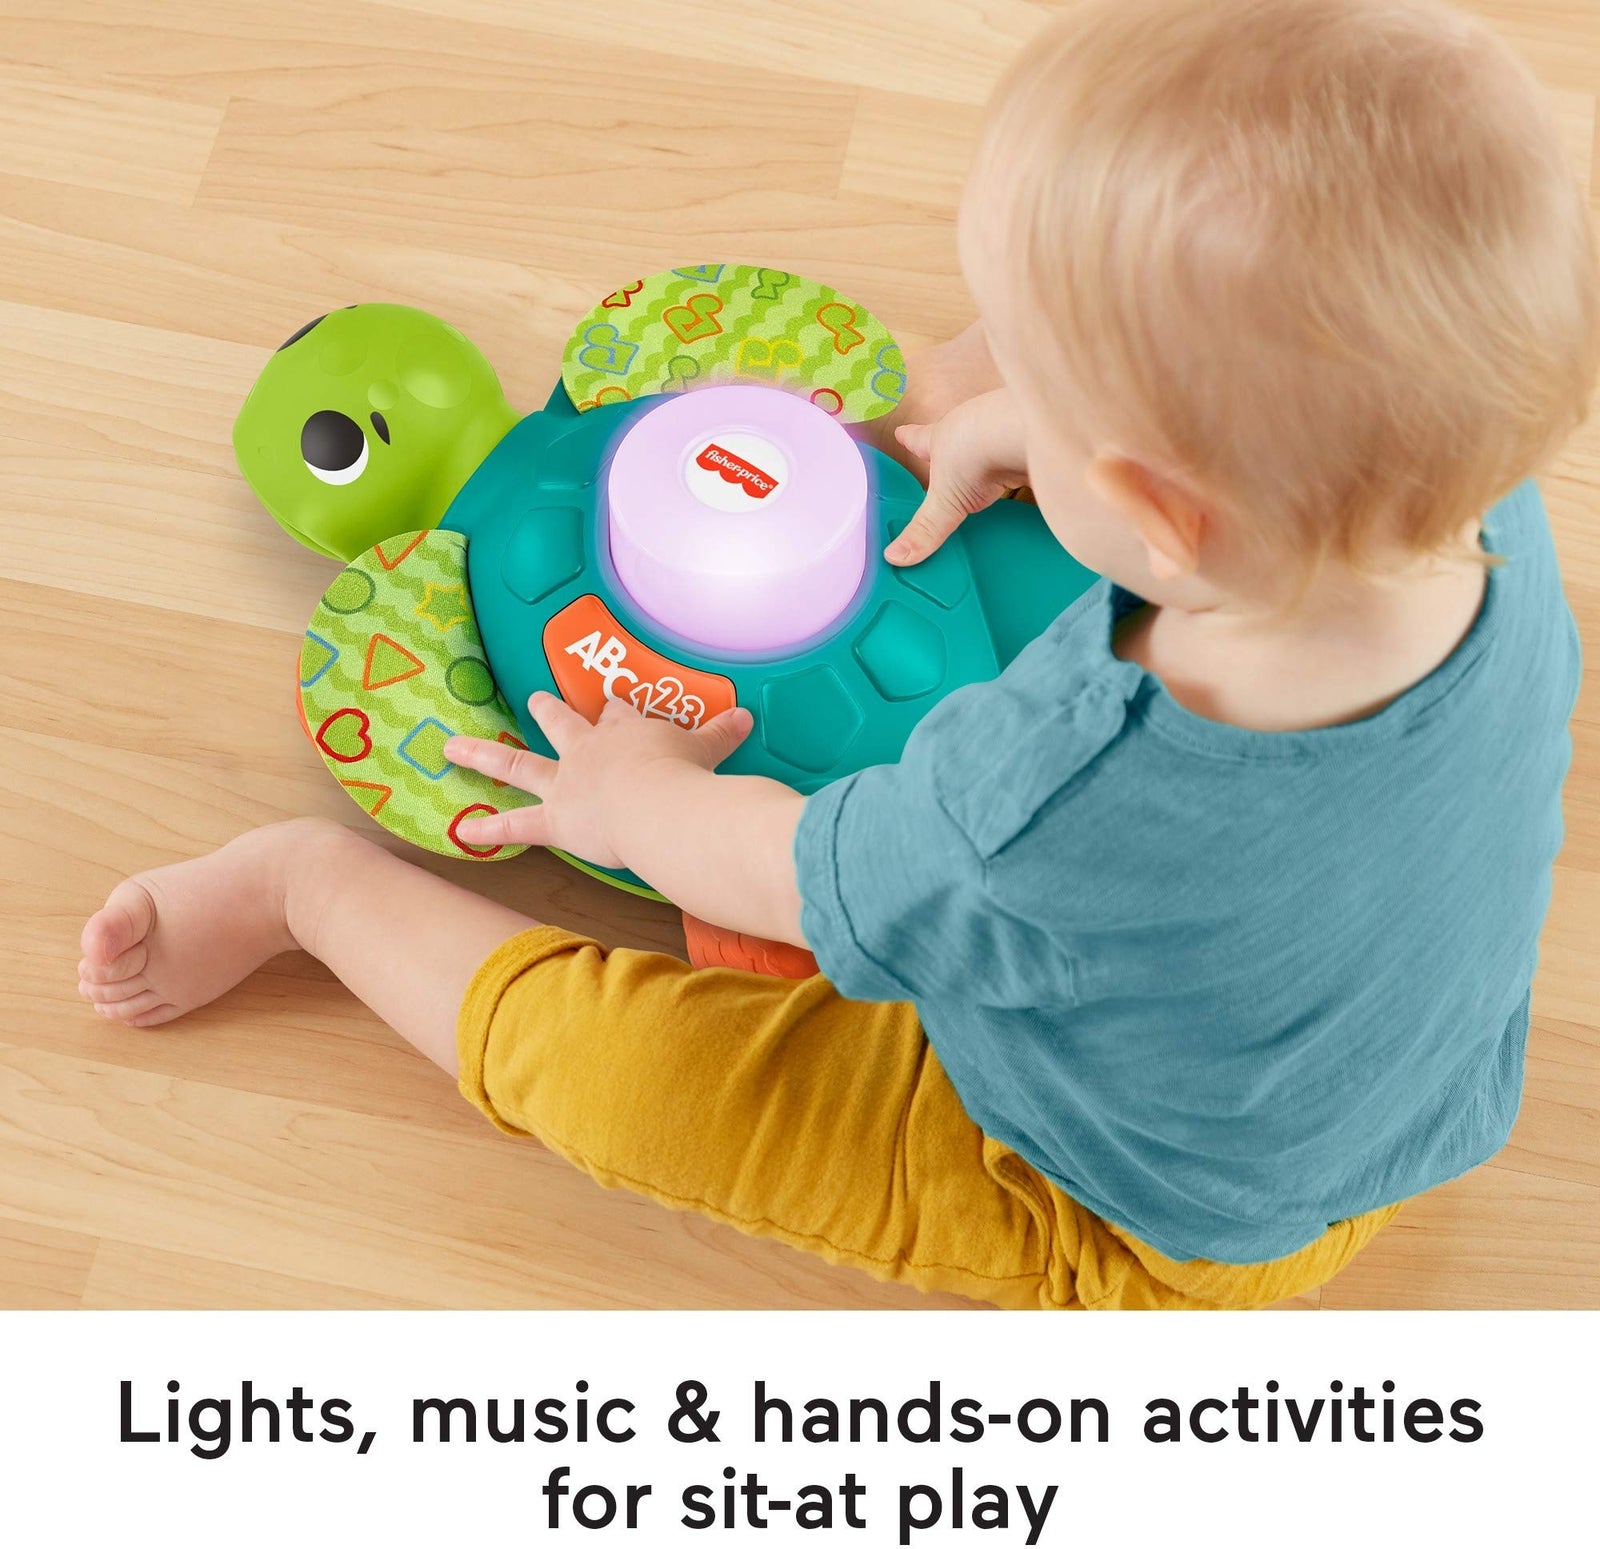 Fisher-Price Linkimals Sit-to-Crawl Sea Turtle, Light-up Musical Crawling Toy for Baby